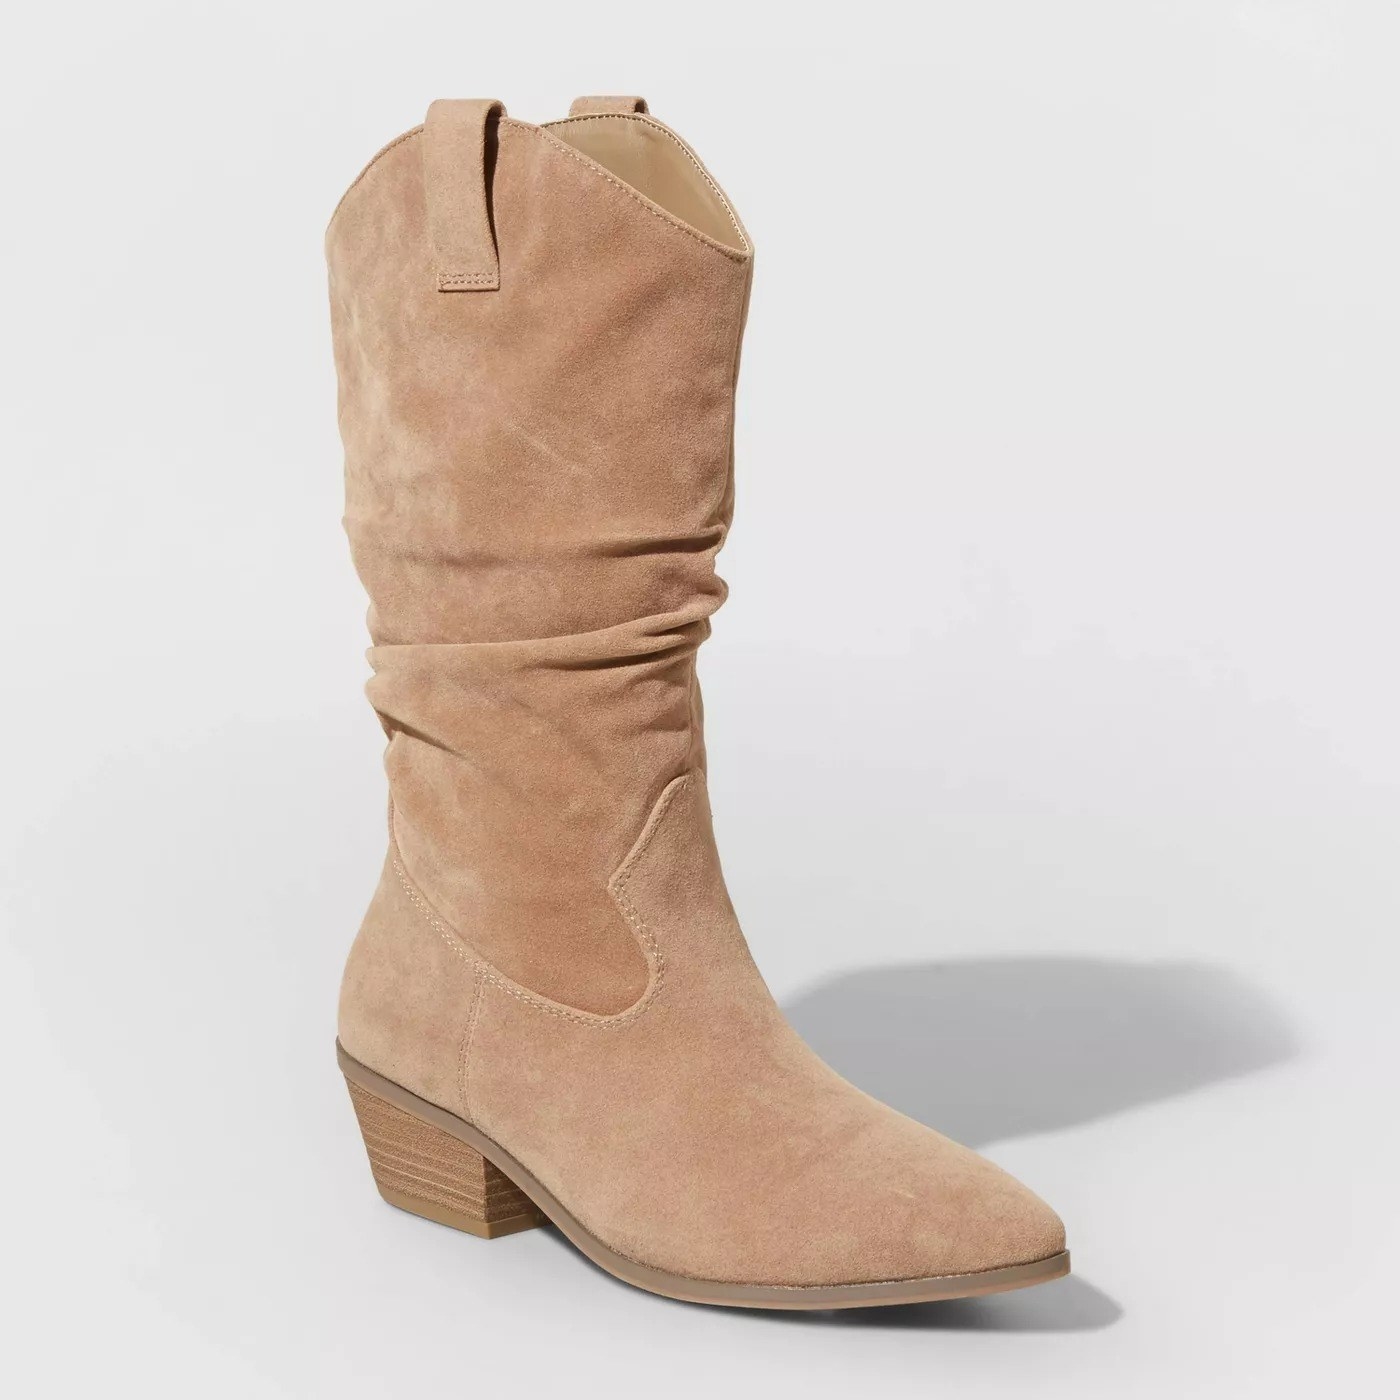 The tan boot with light brown sole